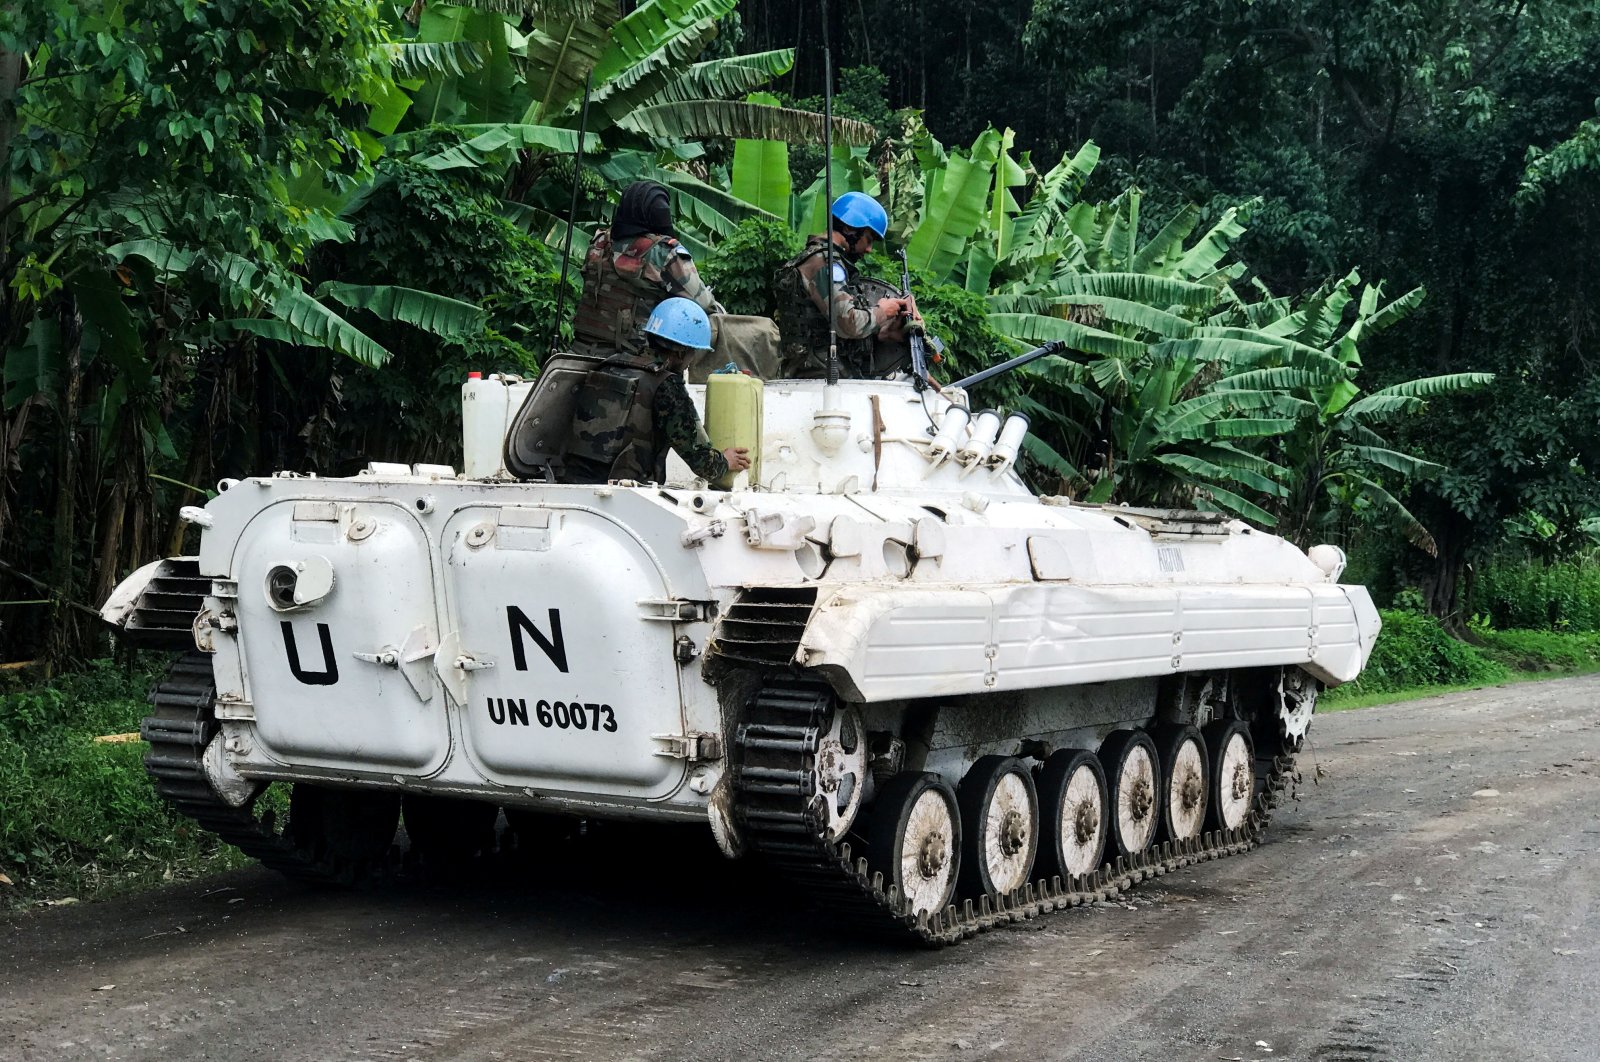 U.N. Organization Stabilization Mission in the Democratic Republic of the Congo peacekeepers patrol areas affected by the recent attacks by M23 rebels fighters near Rangira in North Kivu, DR Congo, March 29, 2022. (Reuters Photo)